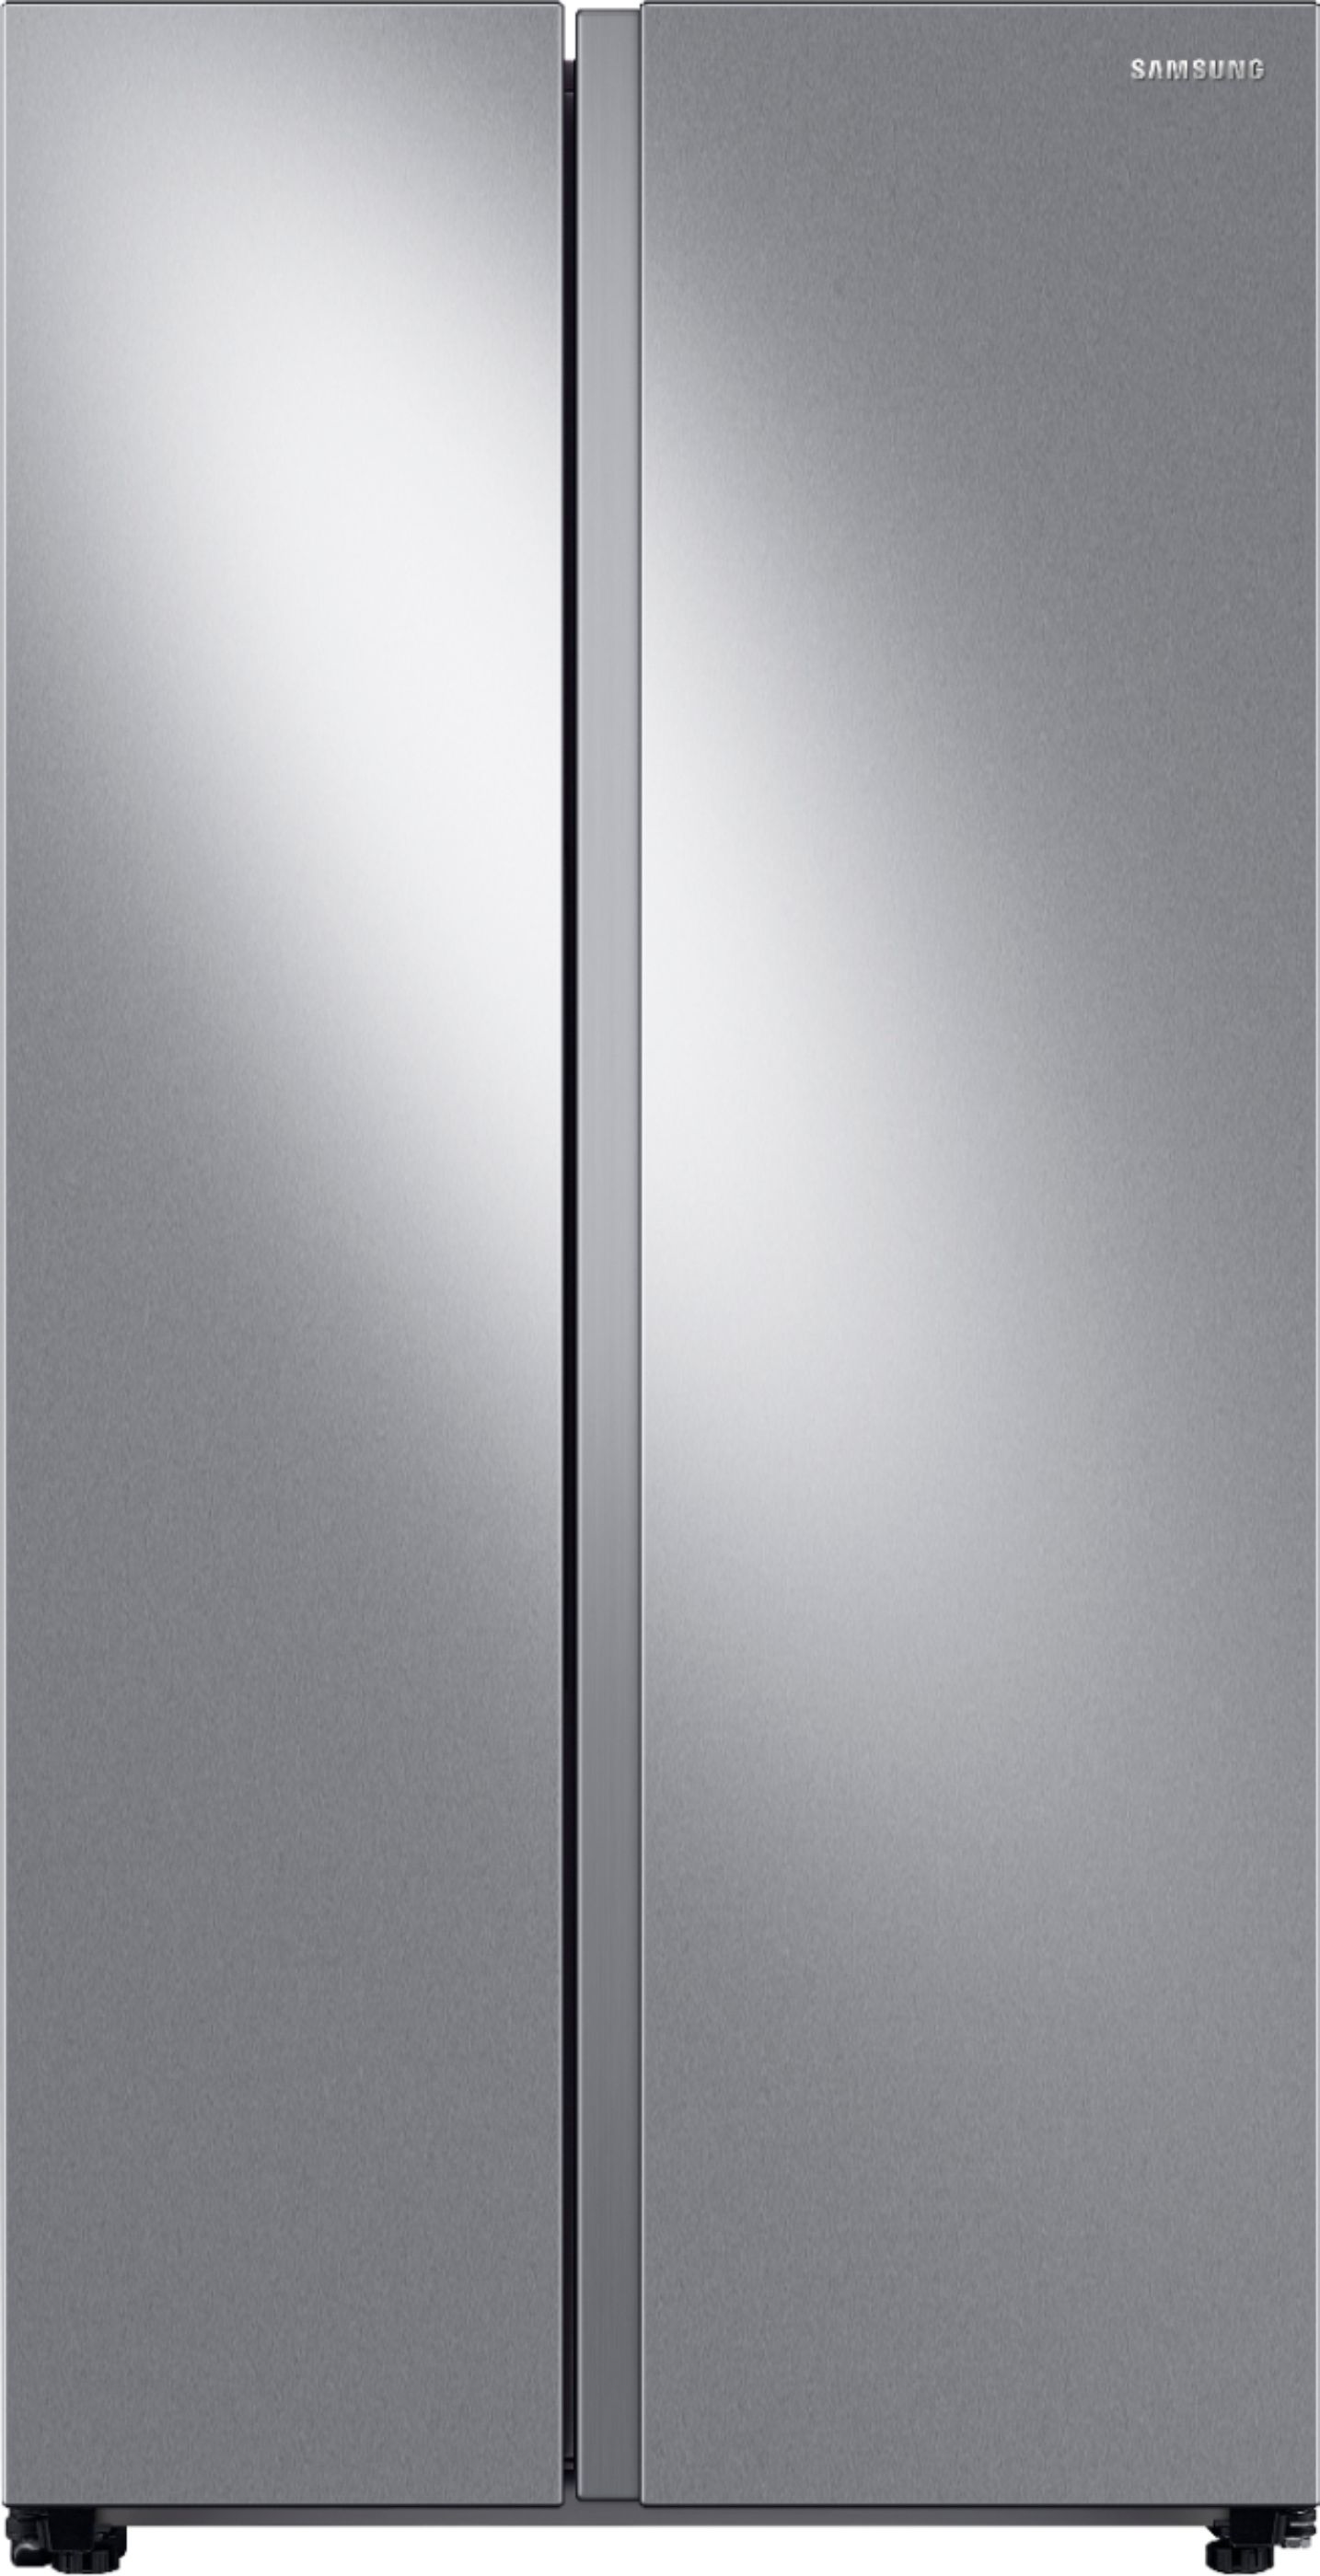 Samsung 28 cu. ft. Side-by-Side Smart Refrigerator with Large Capacity  Stainless Steel RS28A500ASR/AA - Best Buy